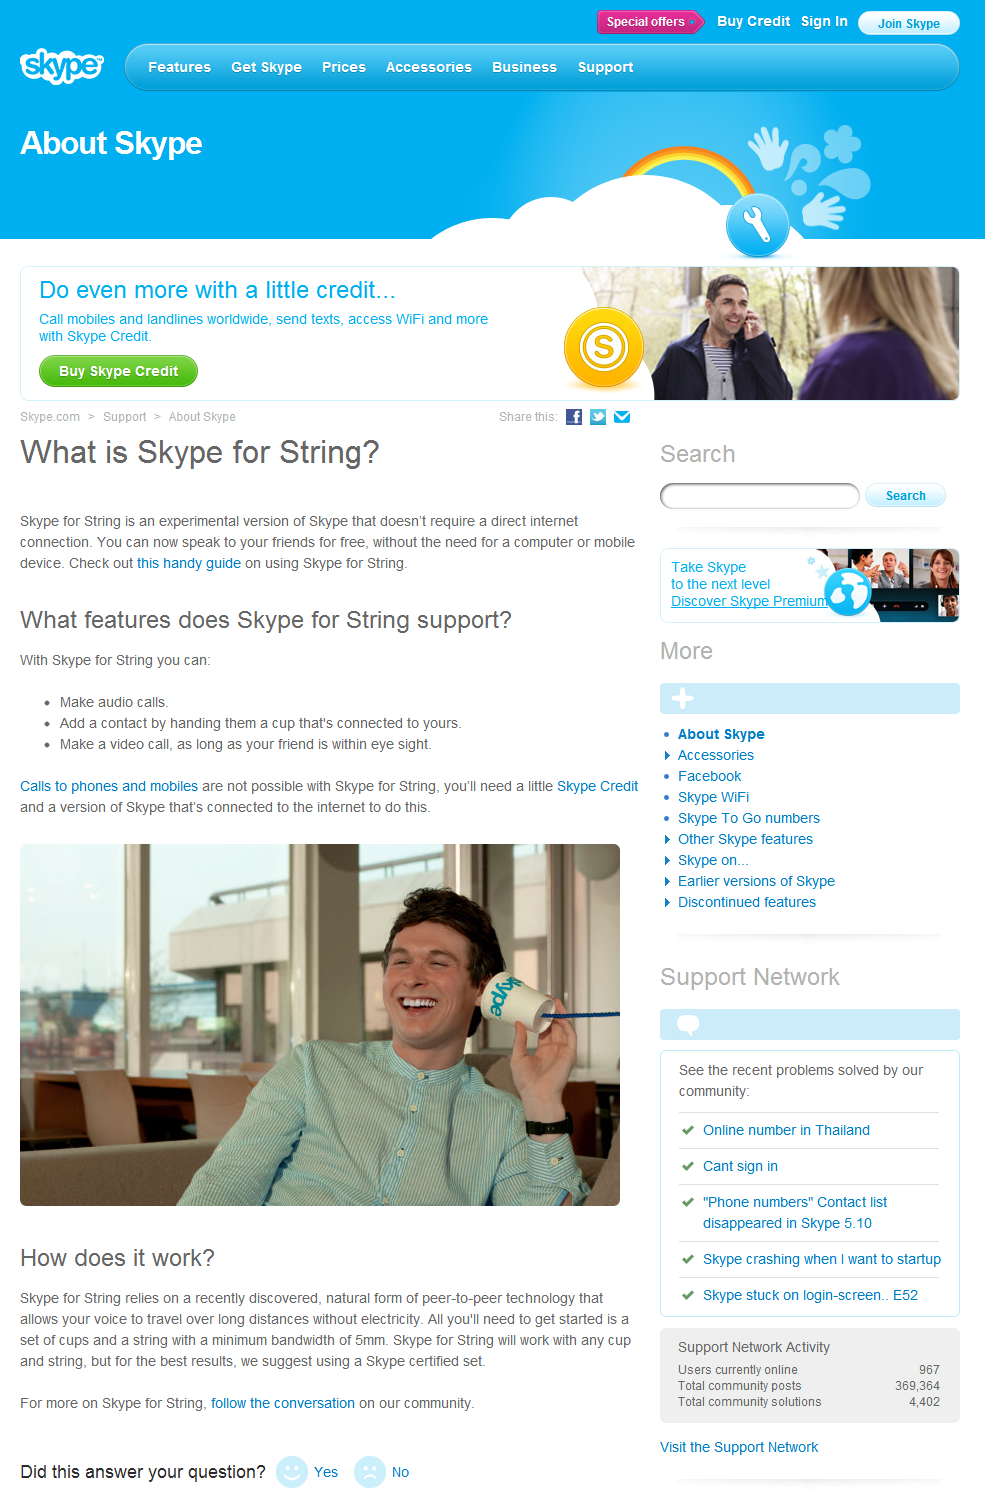 Skype skype for string content content strategy